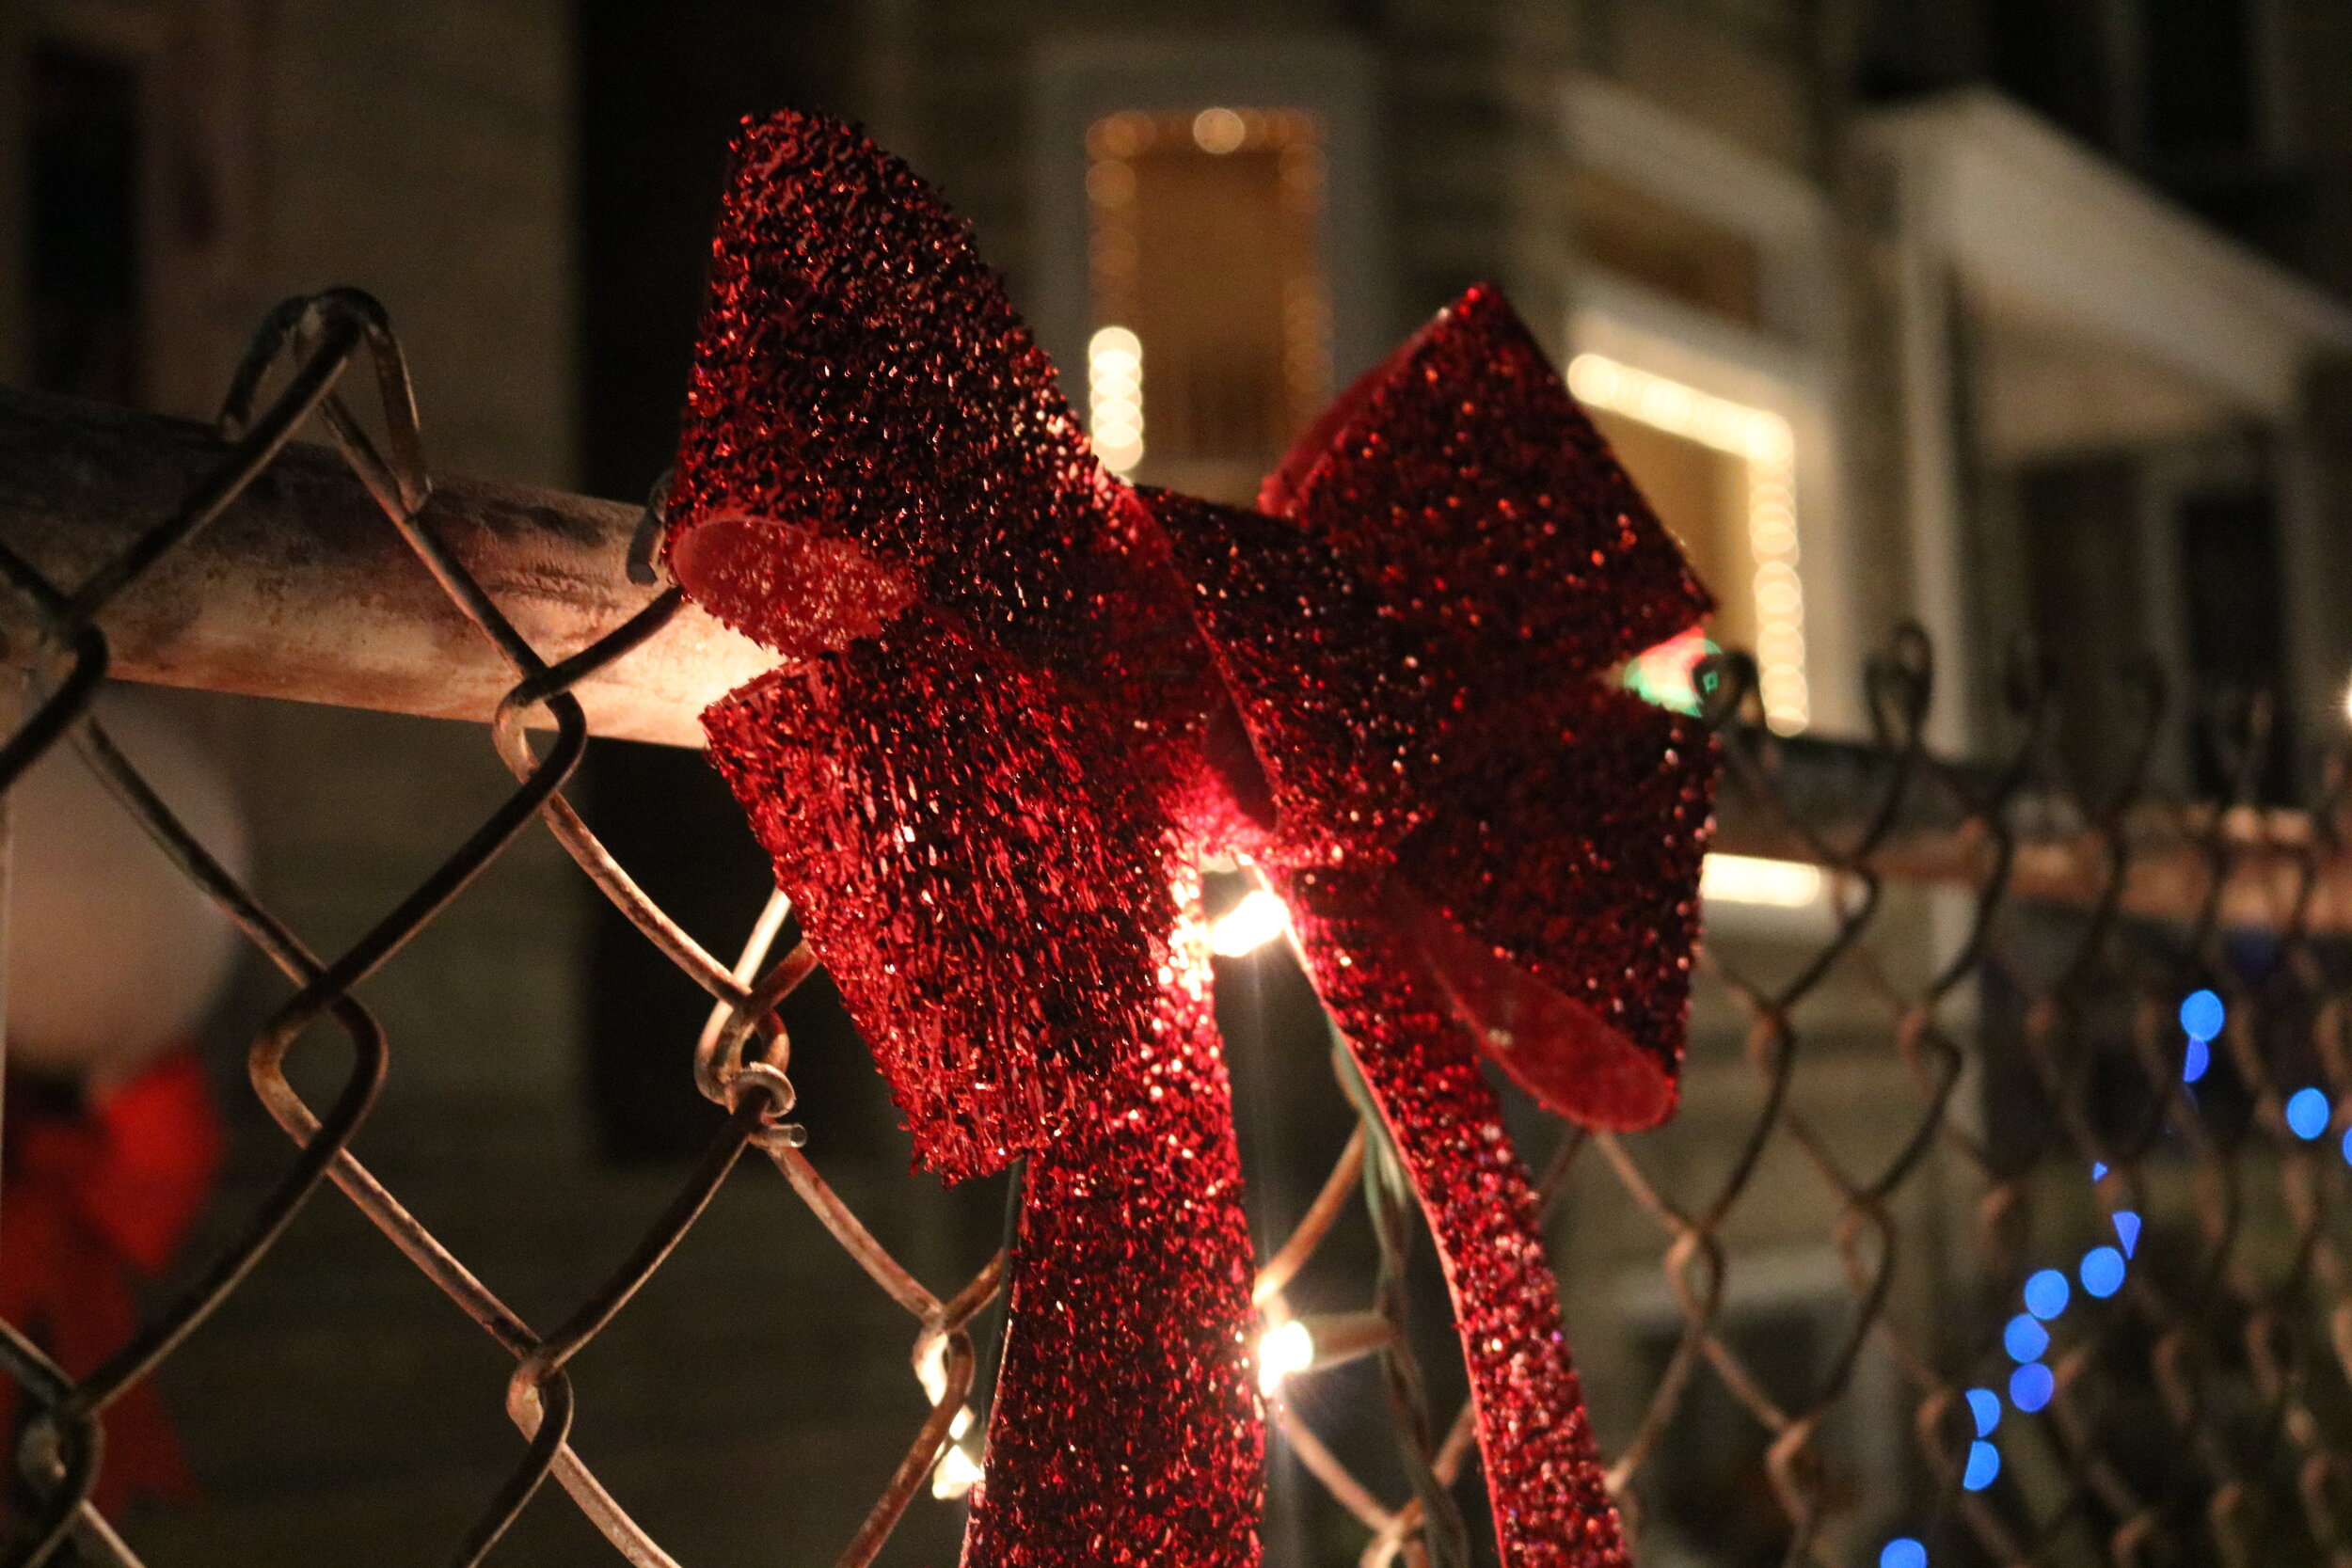  A Christmas bow hangs from a fence during the Christmas light event on Friday, Dec. 13. 